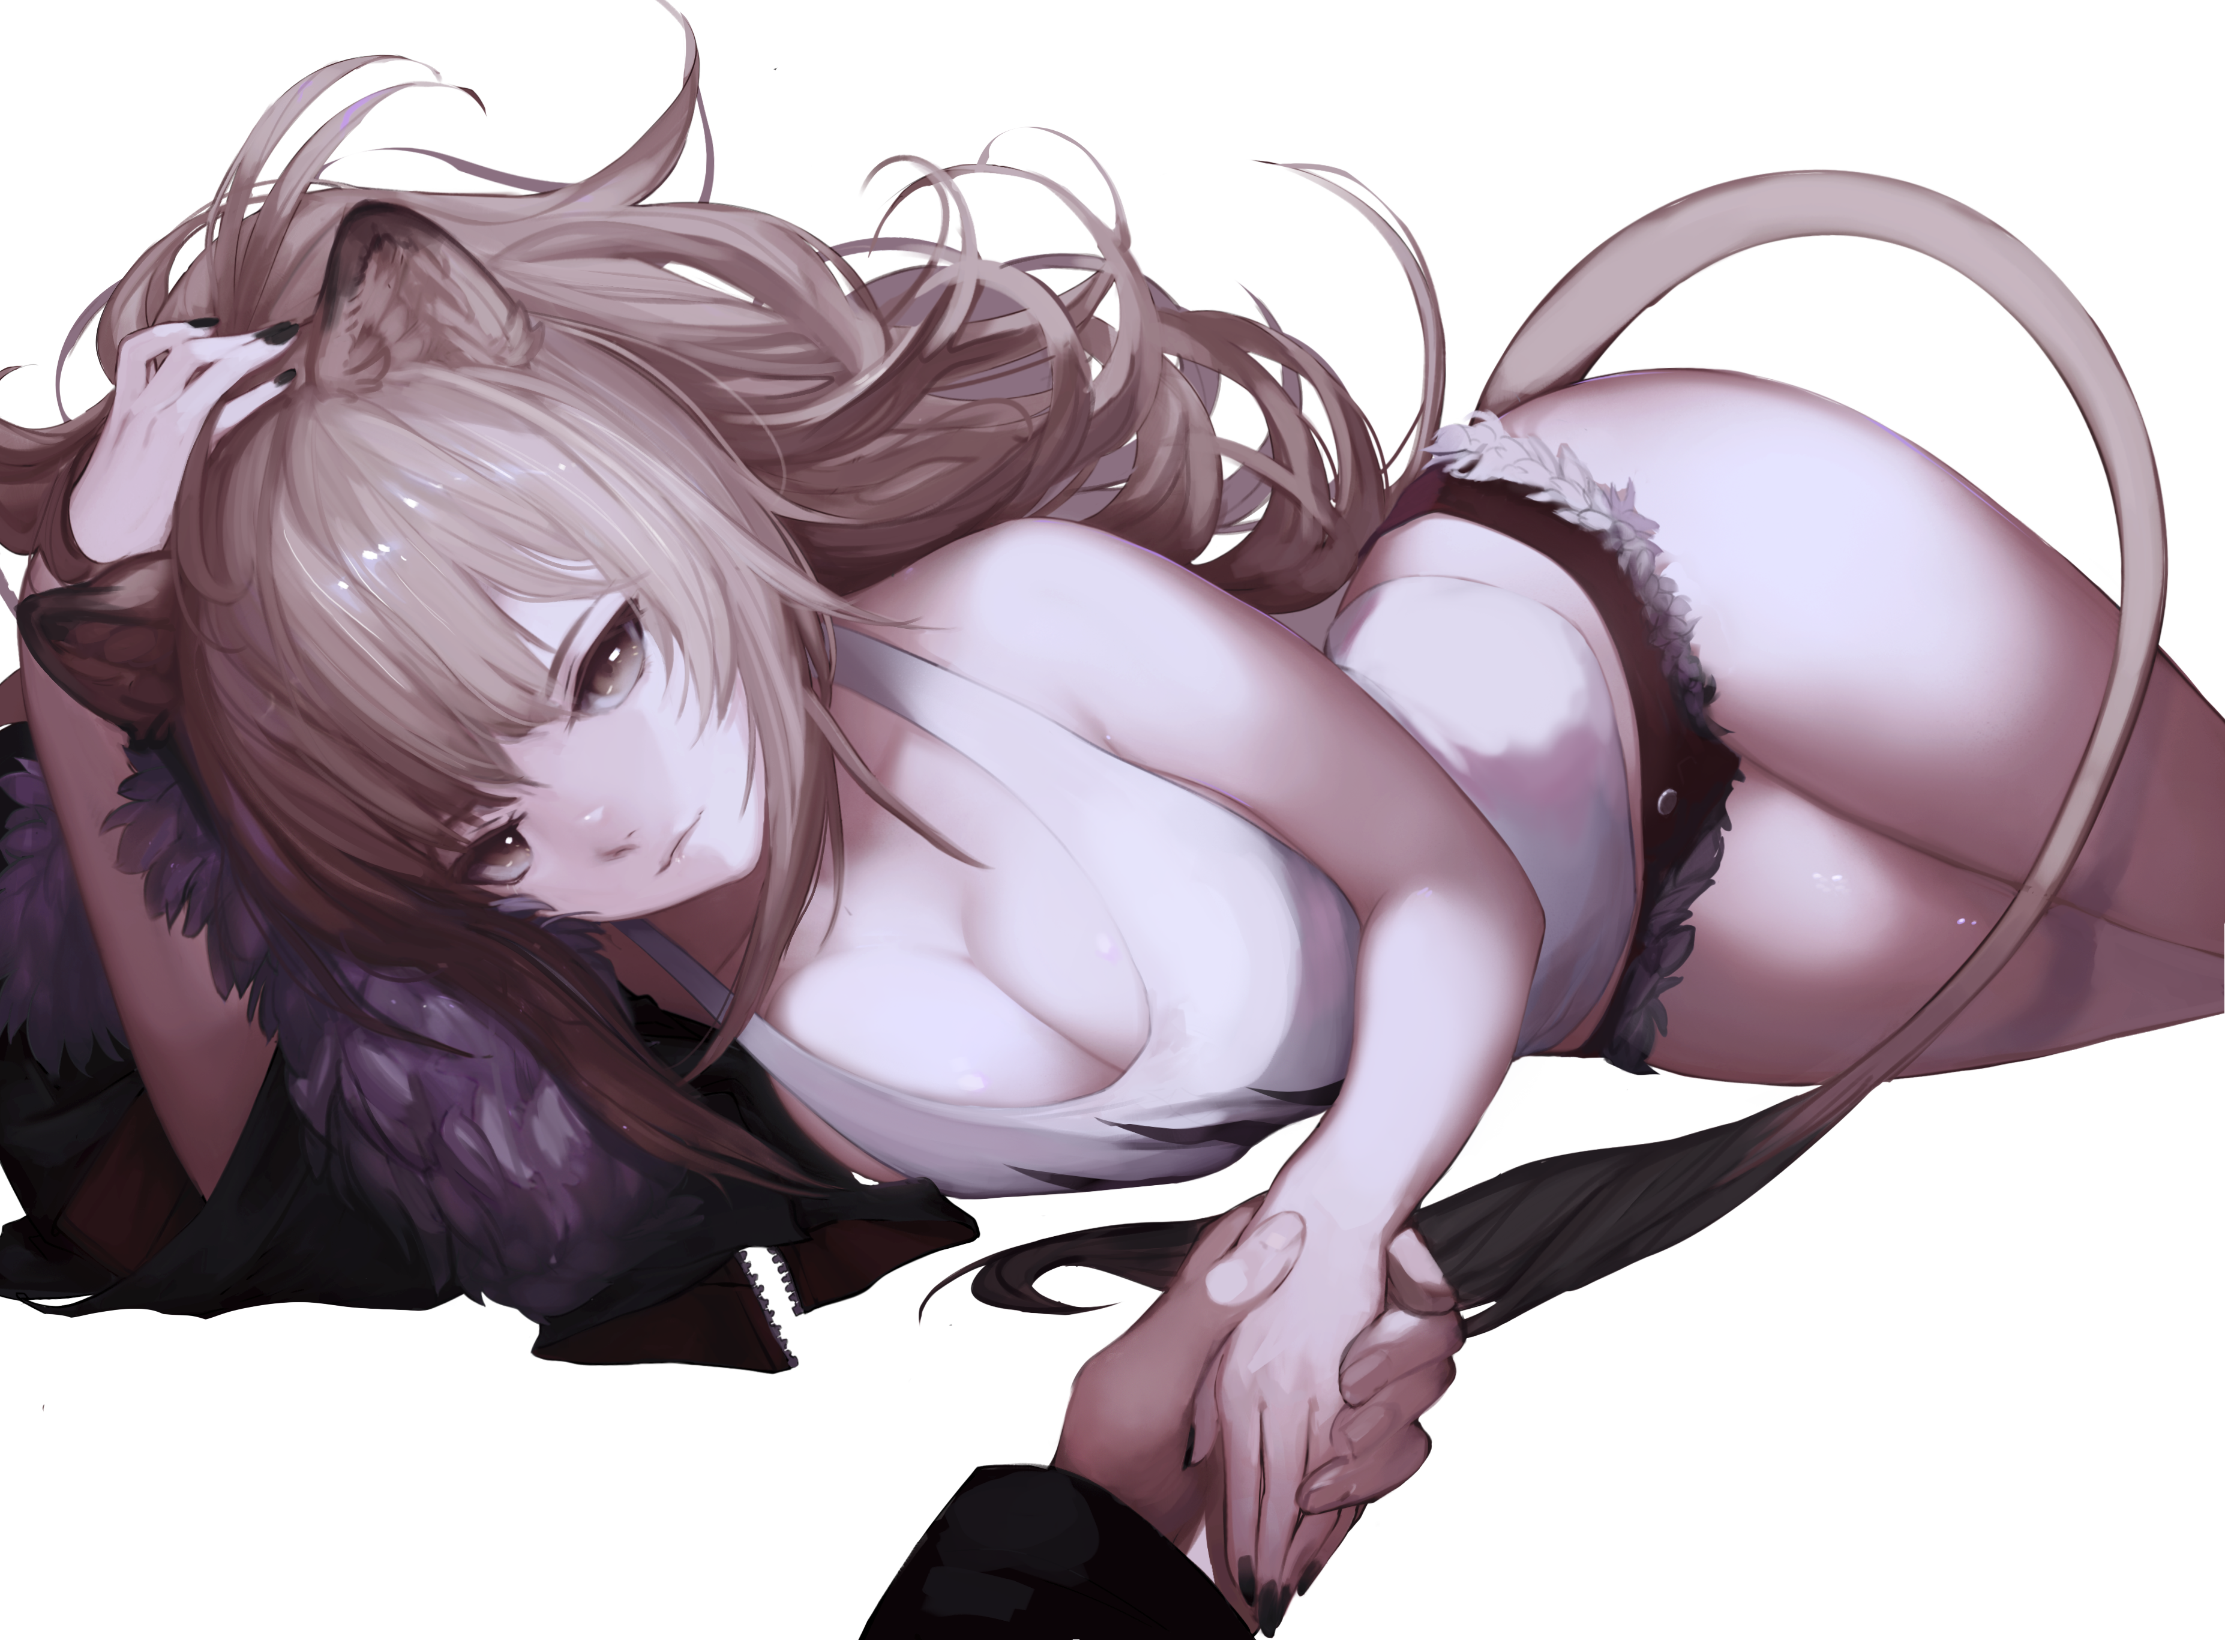 Anime 2225x1640 Siege(Arknights) animal ears blonde cat girl cleavage thighs anime Arknights POV